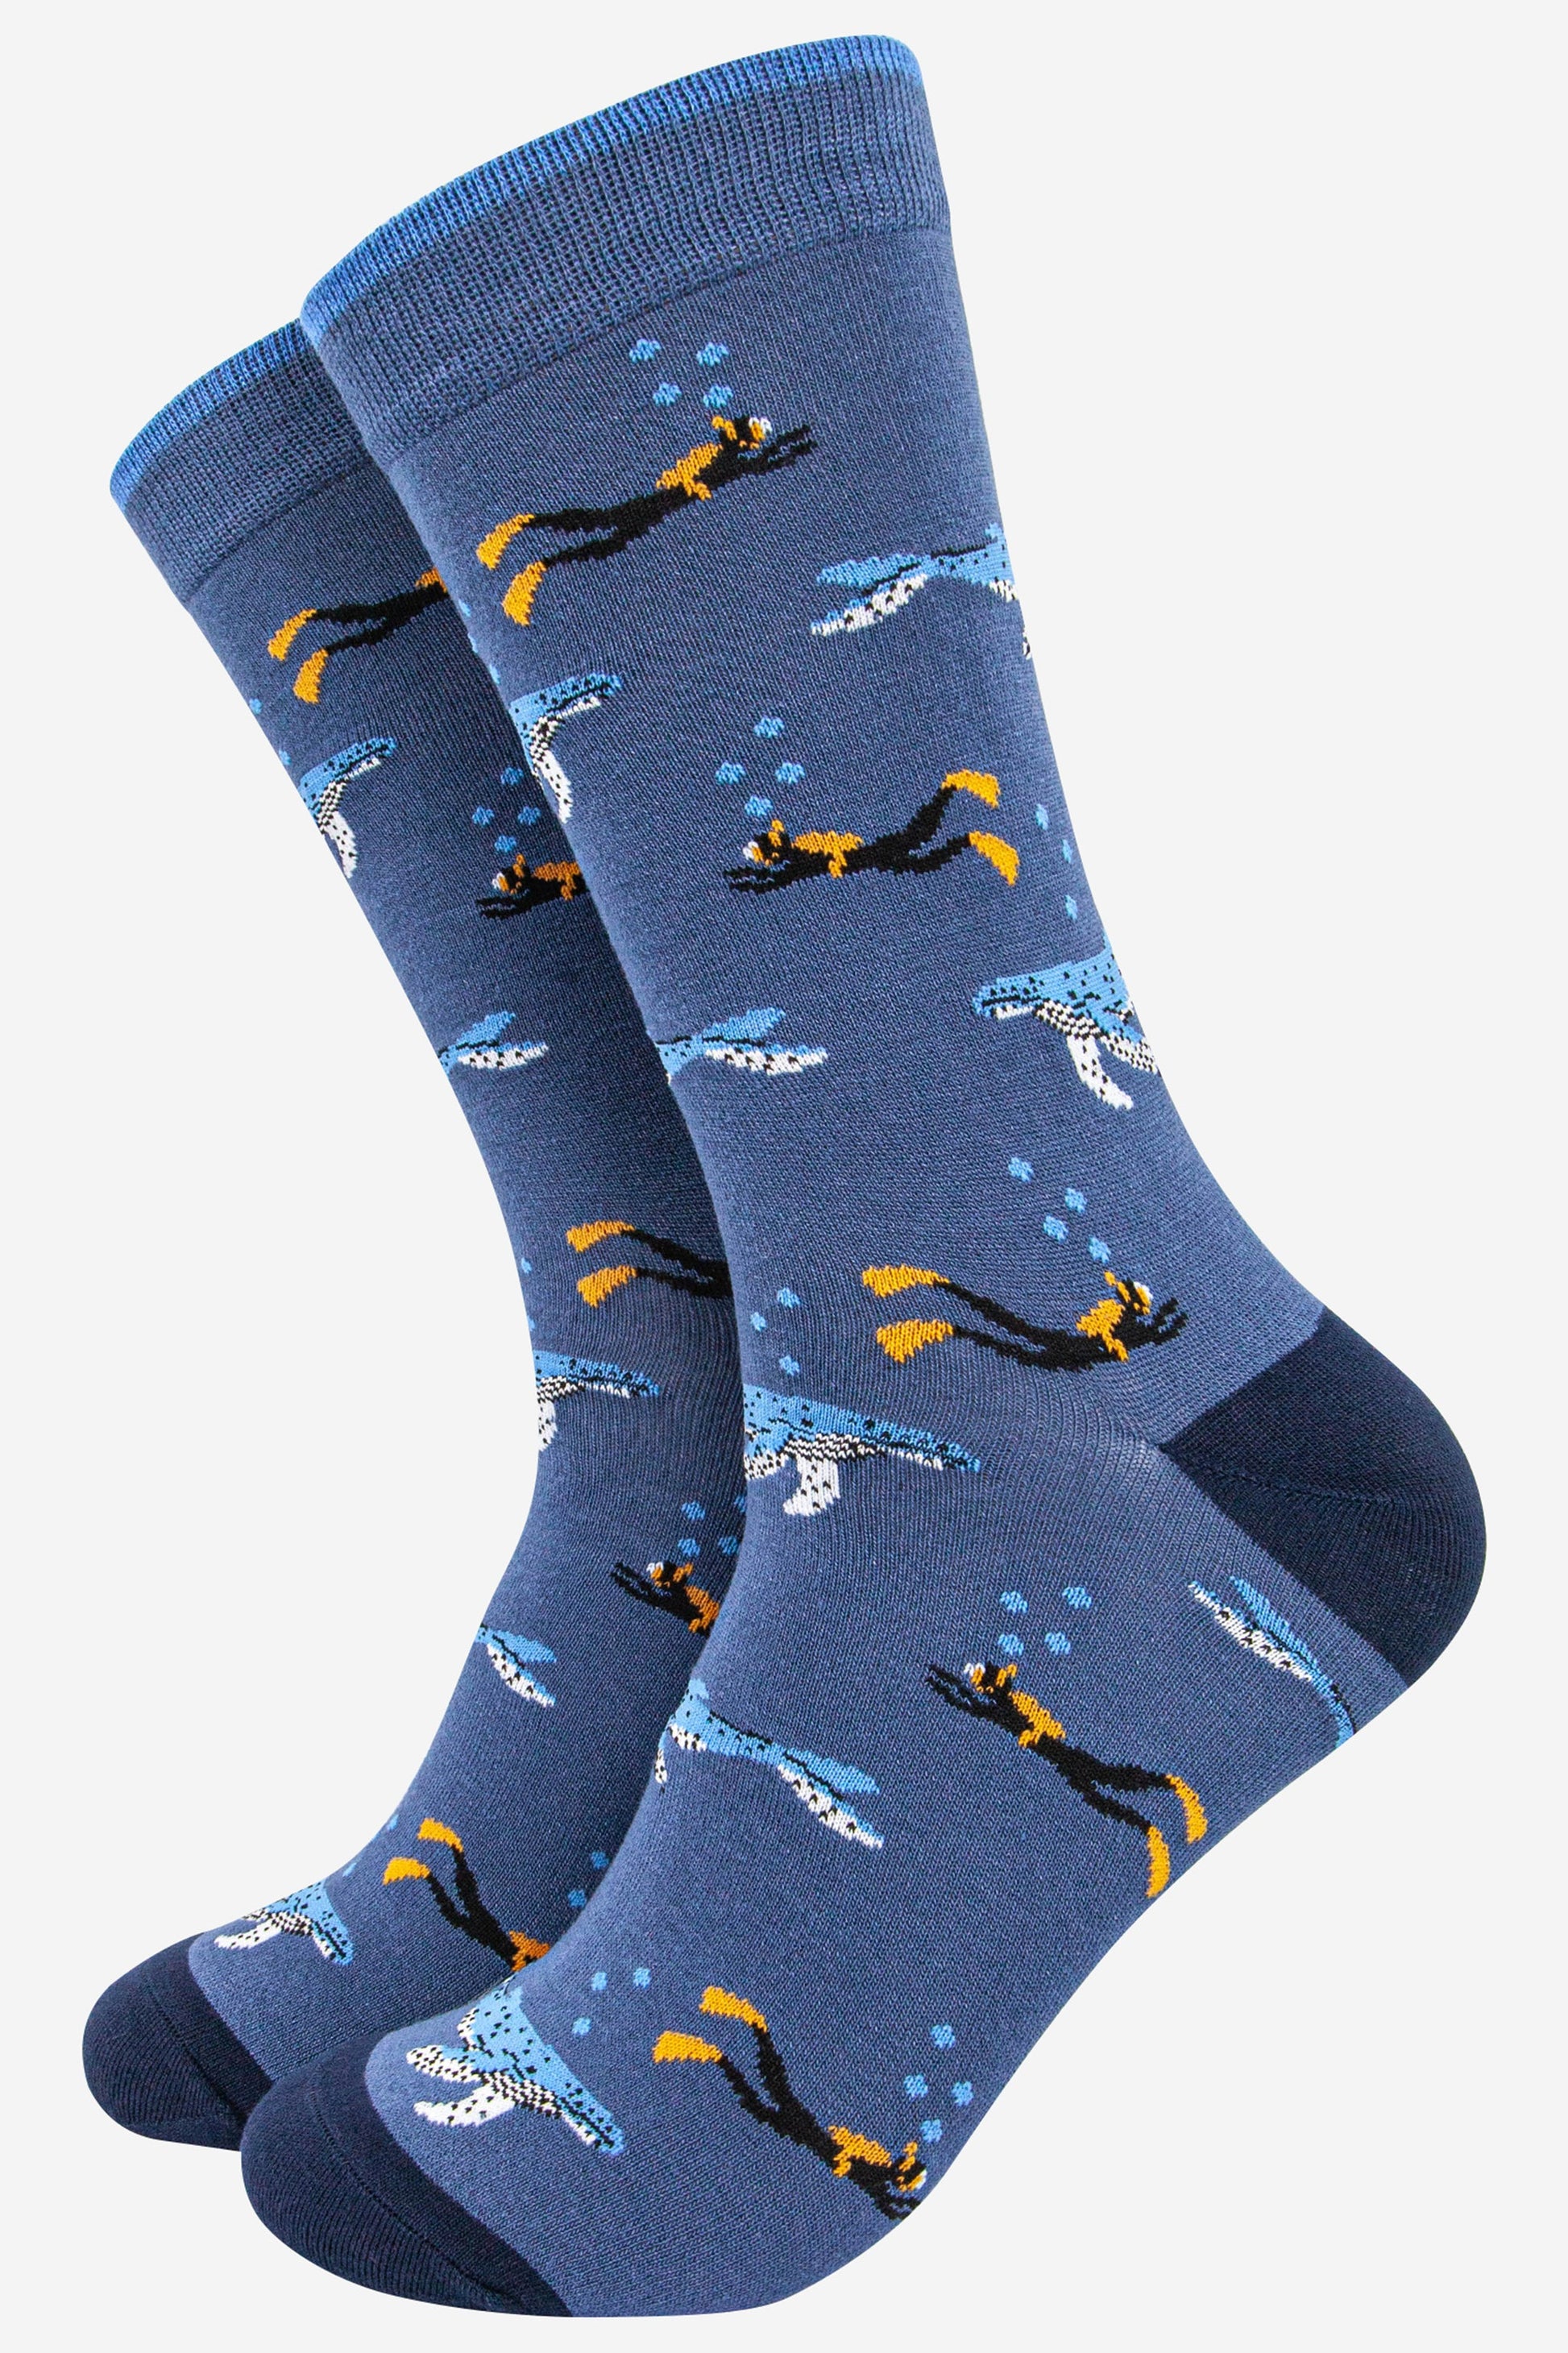 blue bamboo socks with an all over pattern of blue whales and scuba divers